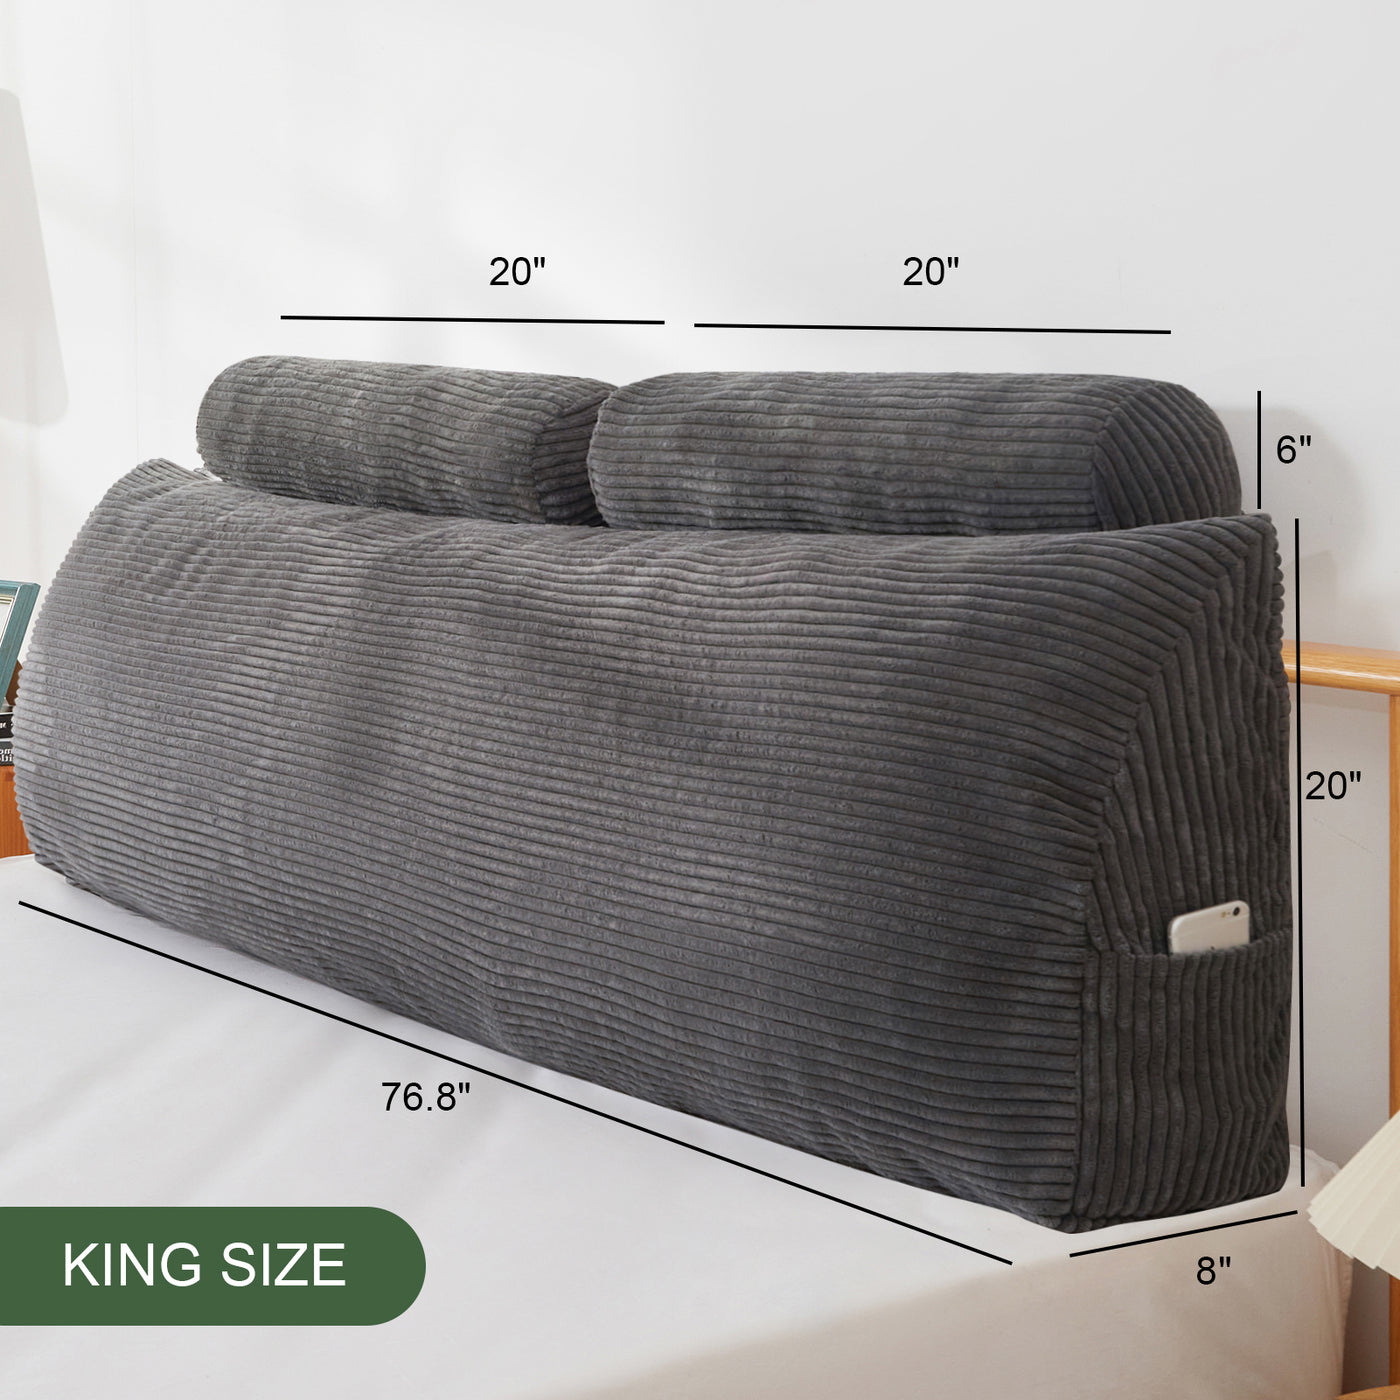 MAXYOYO Wedge Headboard Pillow with Cylindrical Pillow and Removable Cover, Dark Grey